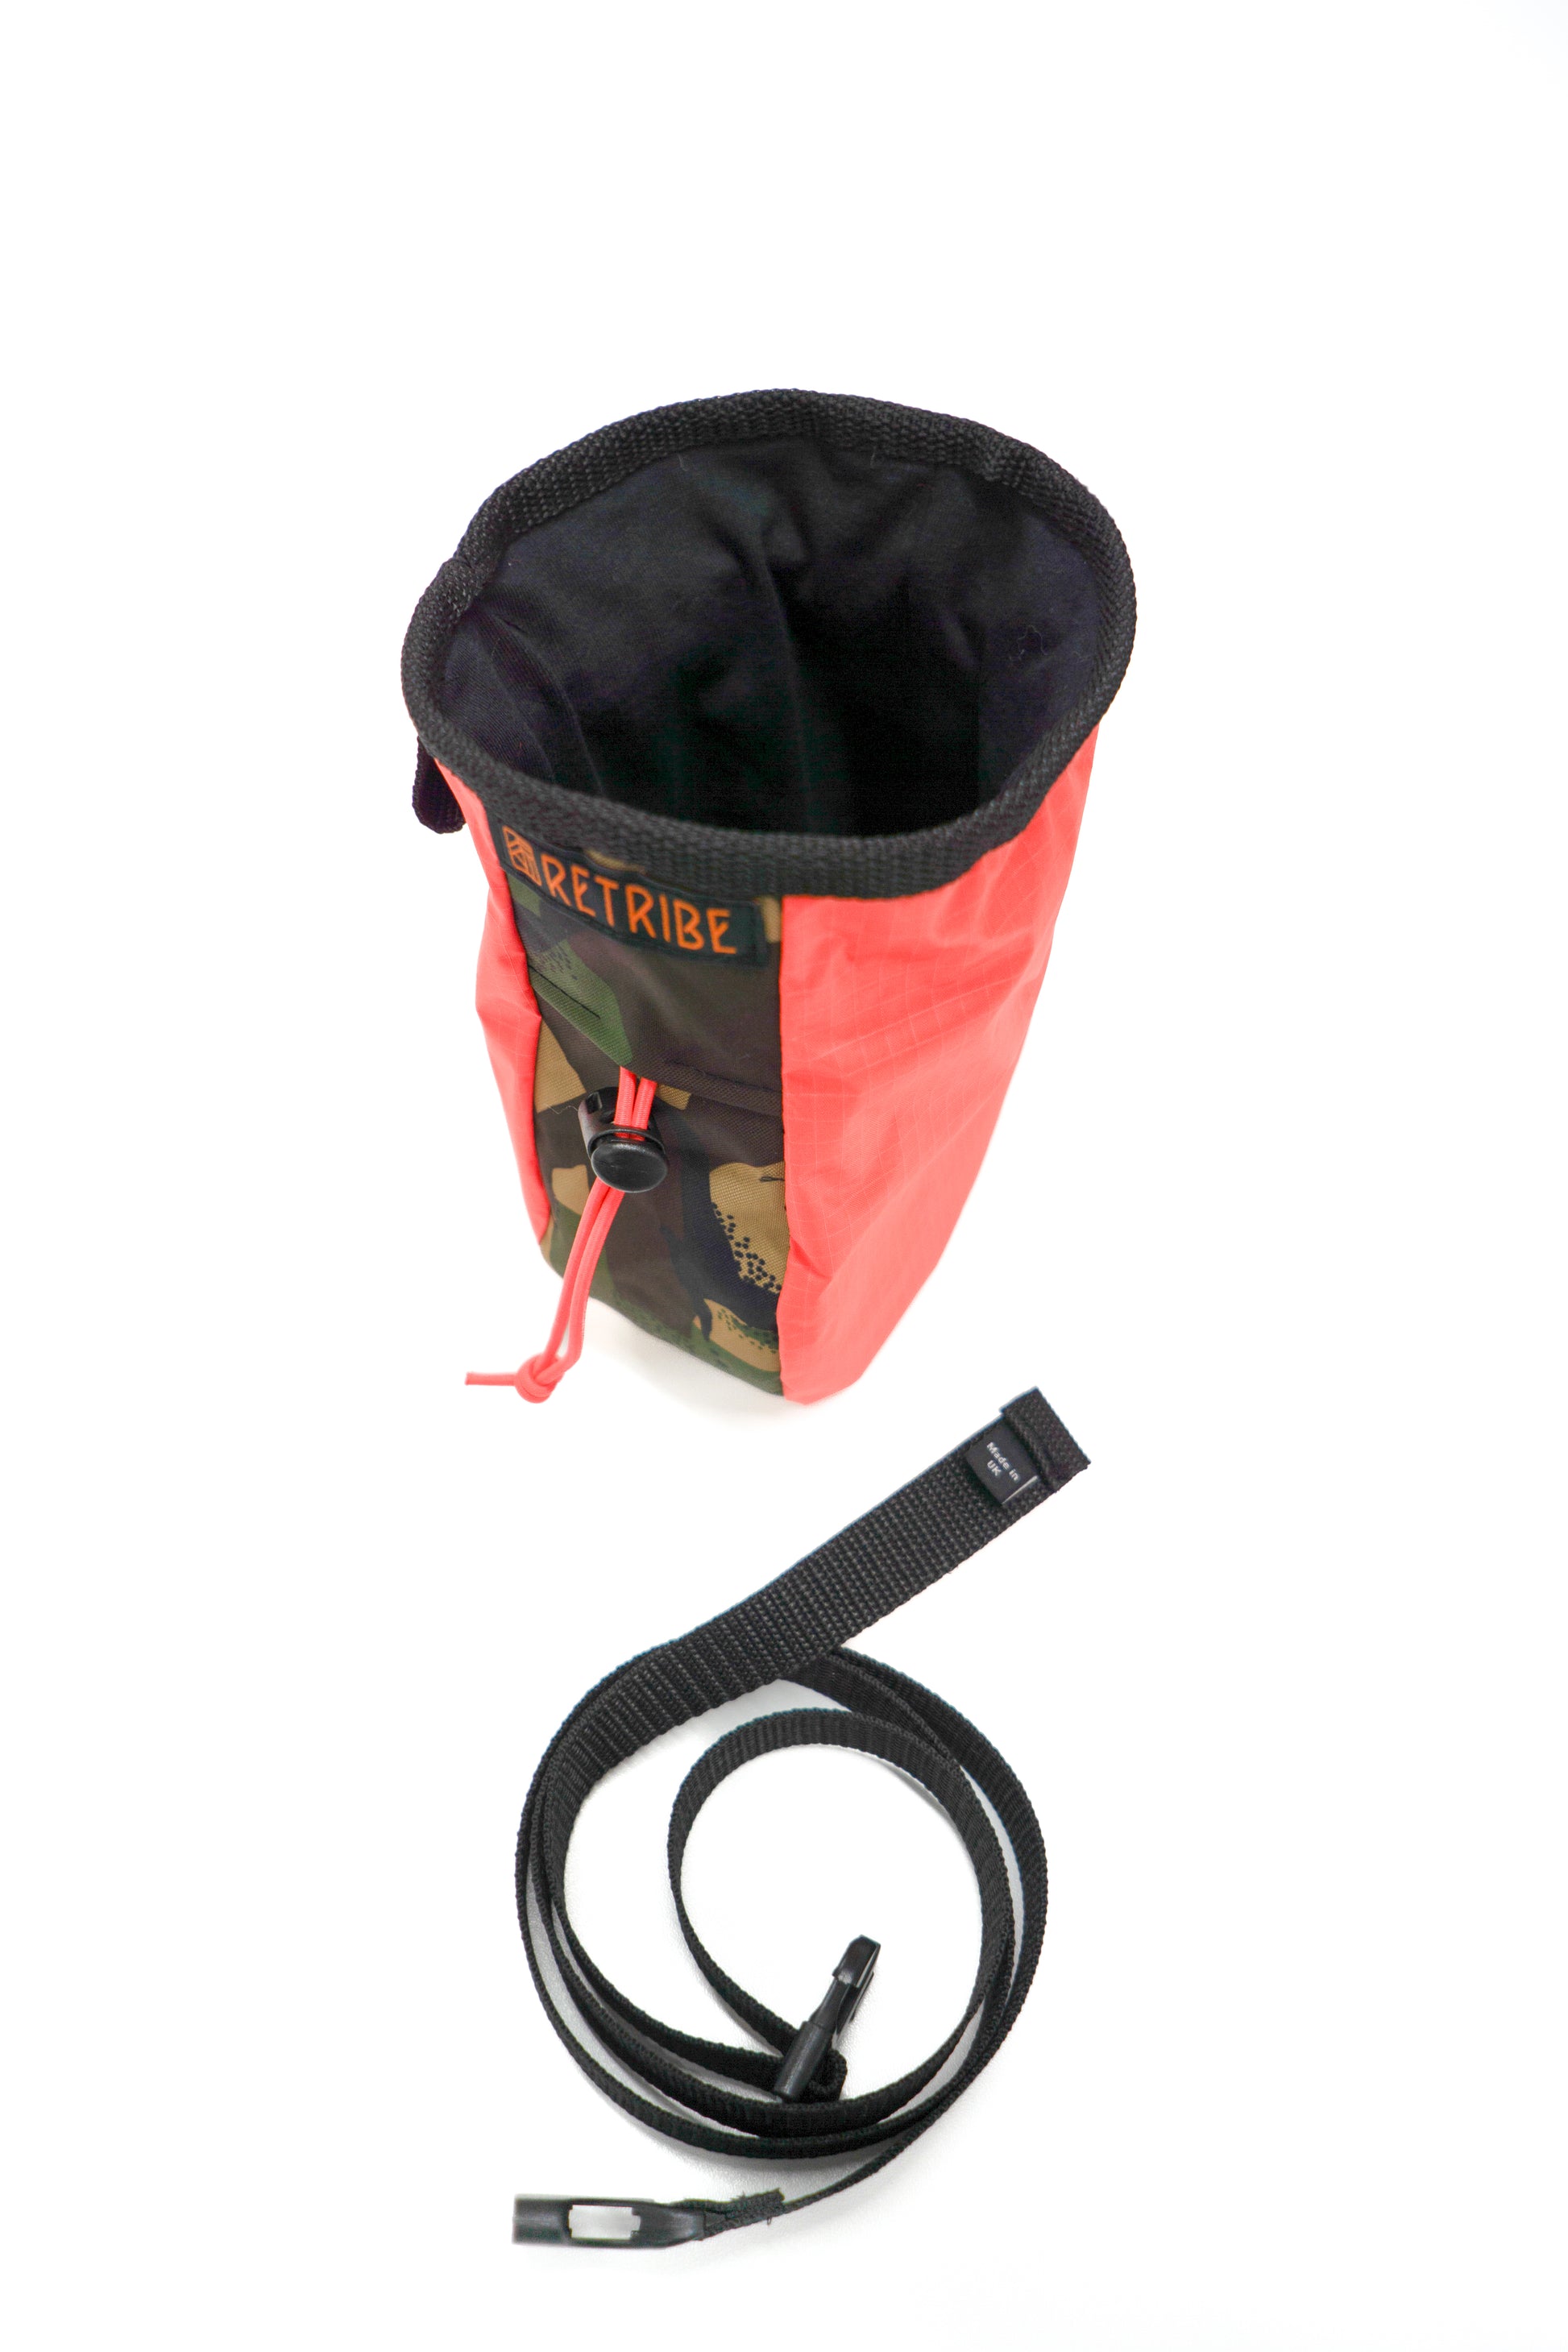 Chalk bag, made from salvaged Tents. With sides made from salvaged pink deadstock fabric. With woven a Retribe badge on the side. Black webbing waist strap.